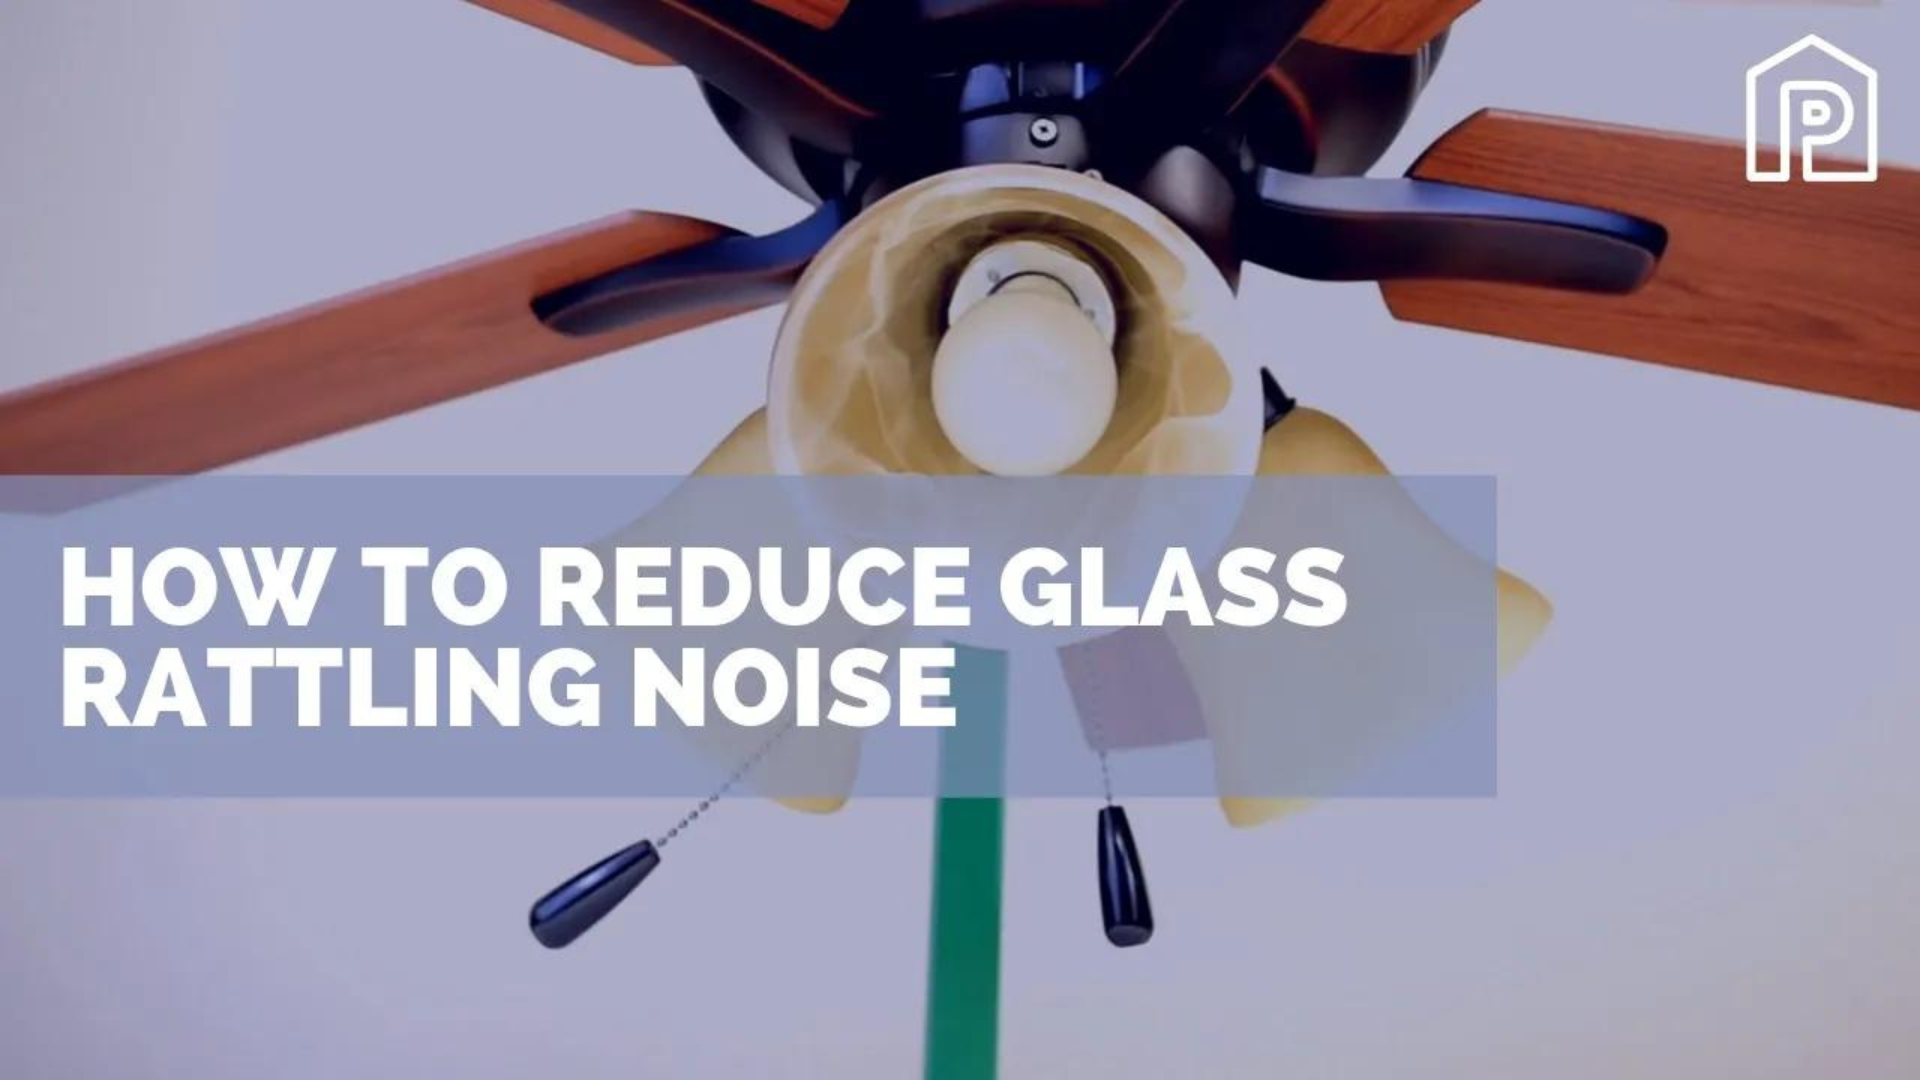 How To Reduce Glass Rattling Noise on Ceiling Fans